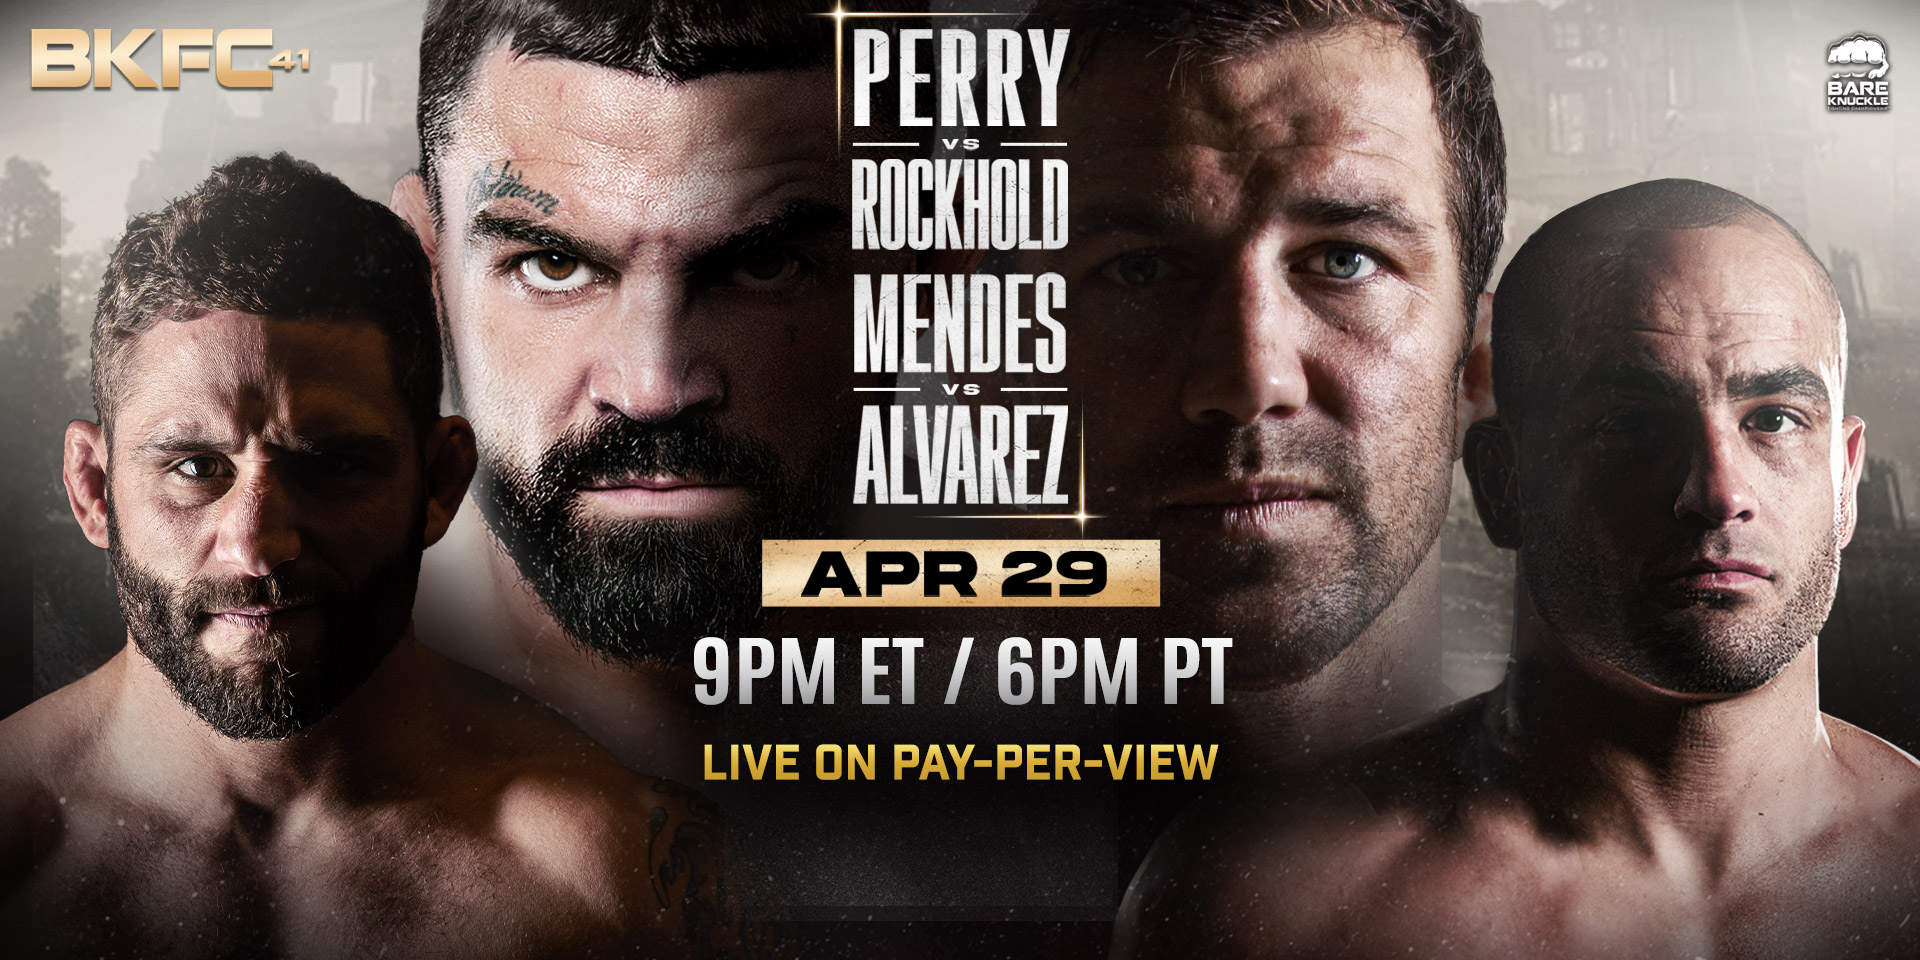 Rockhold vs Perry